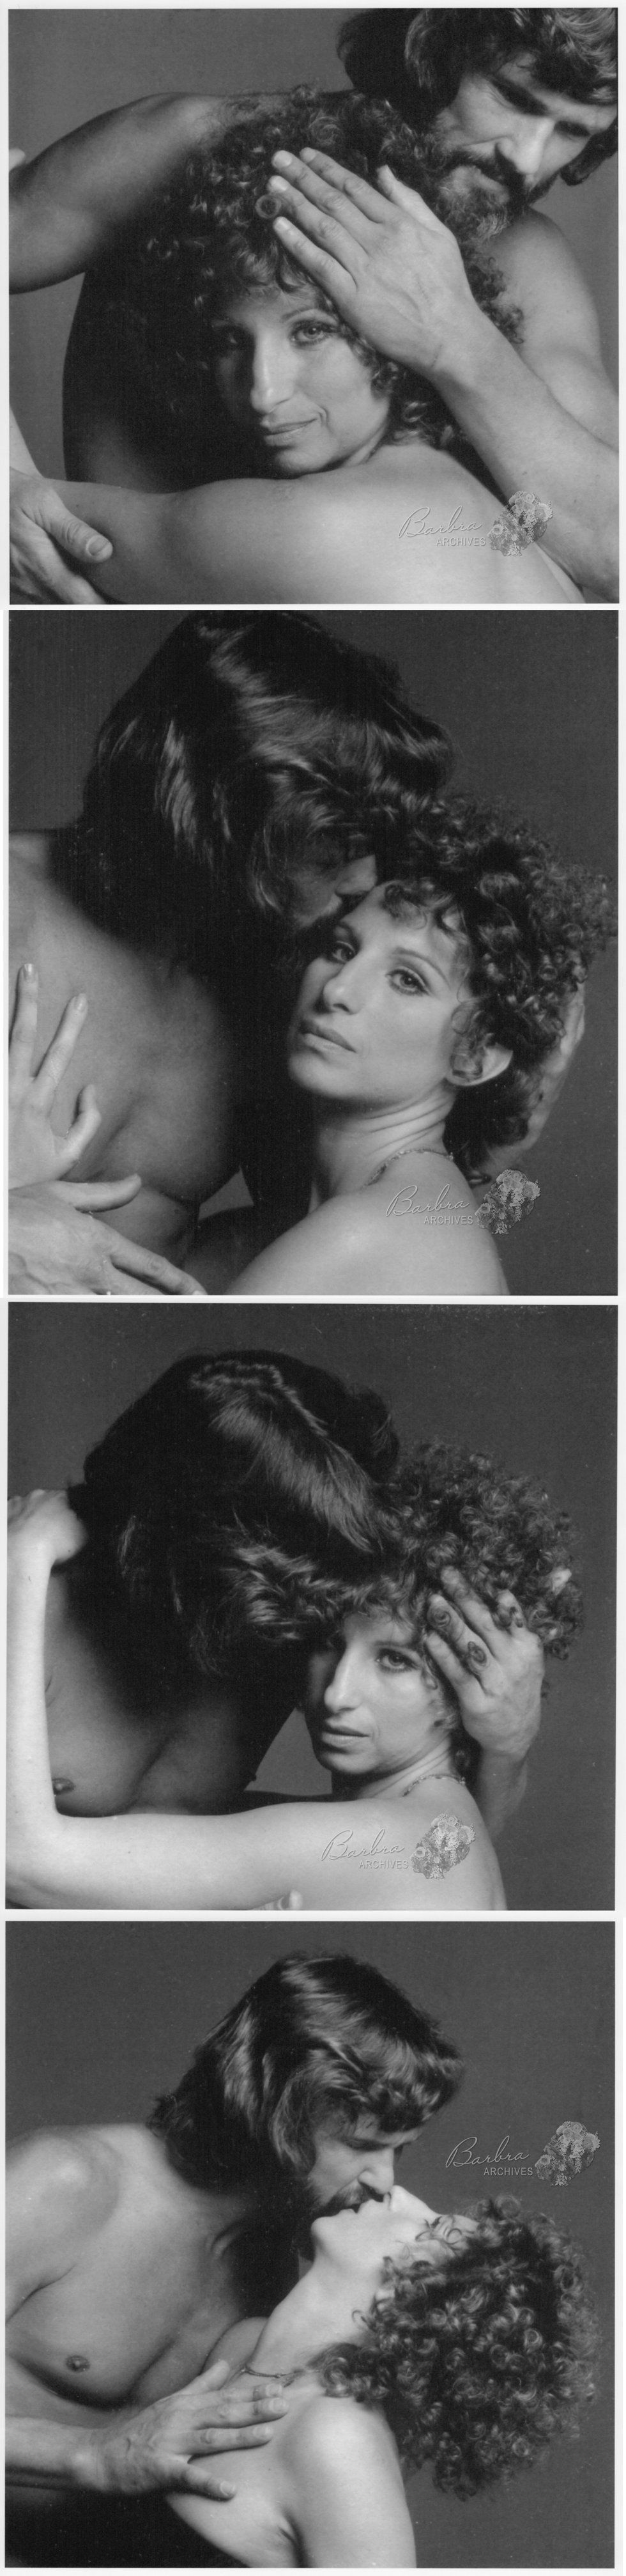 Scavullo photographic outtakes of Kristofferson and Streisand.